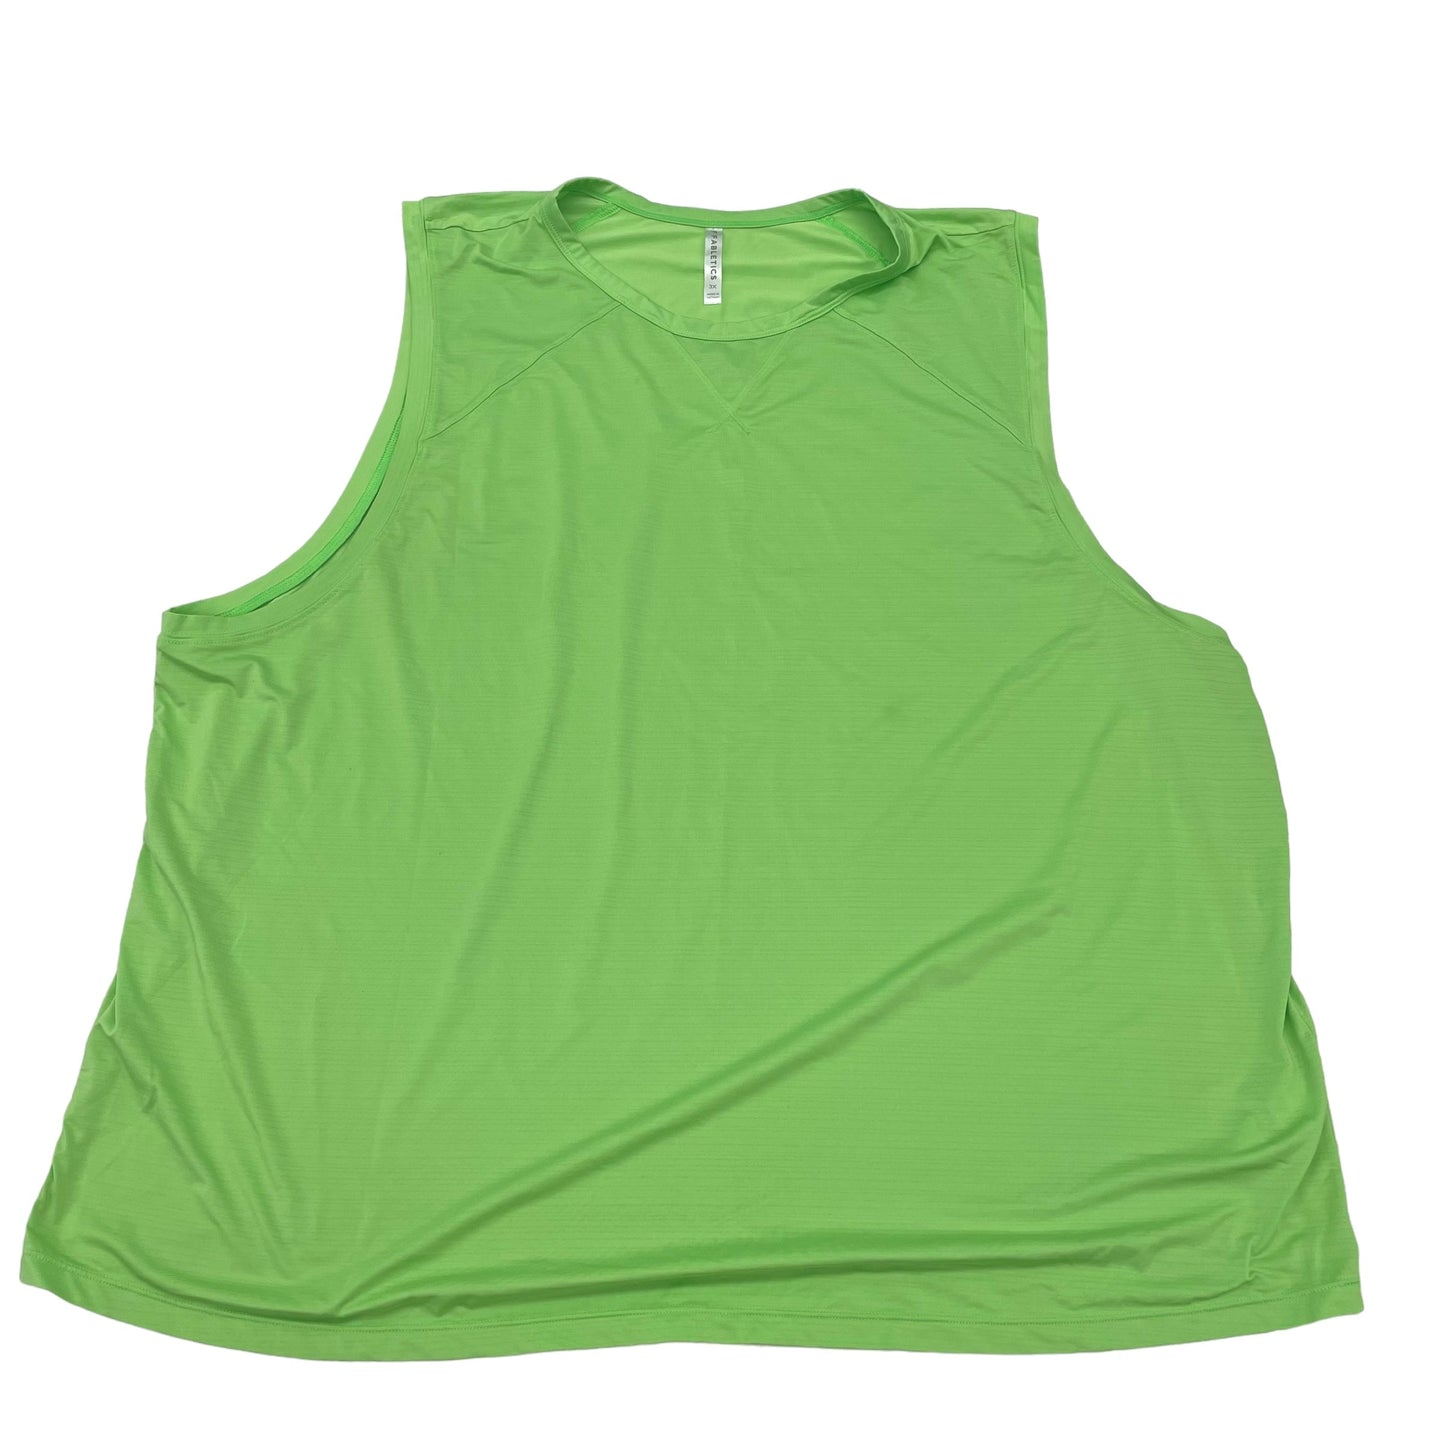 GREEN FABLETICS ATHLETIC TANK TOP, Size 3X